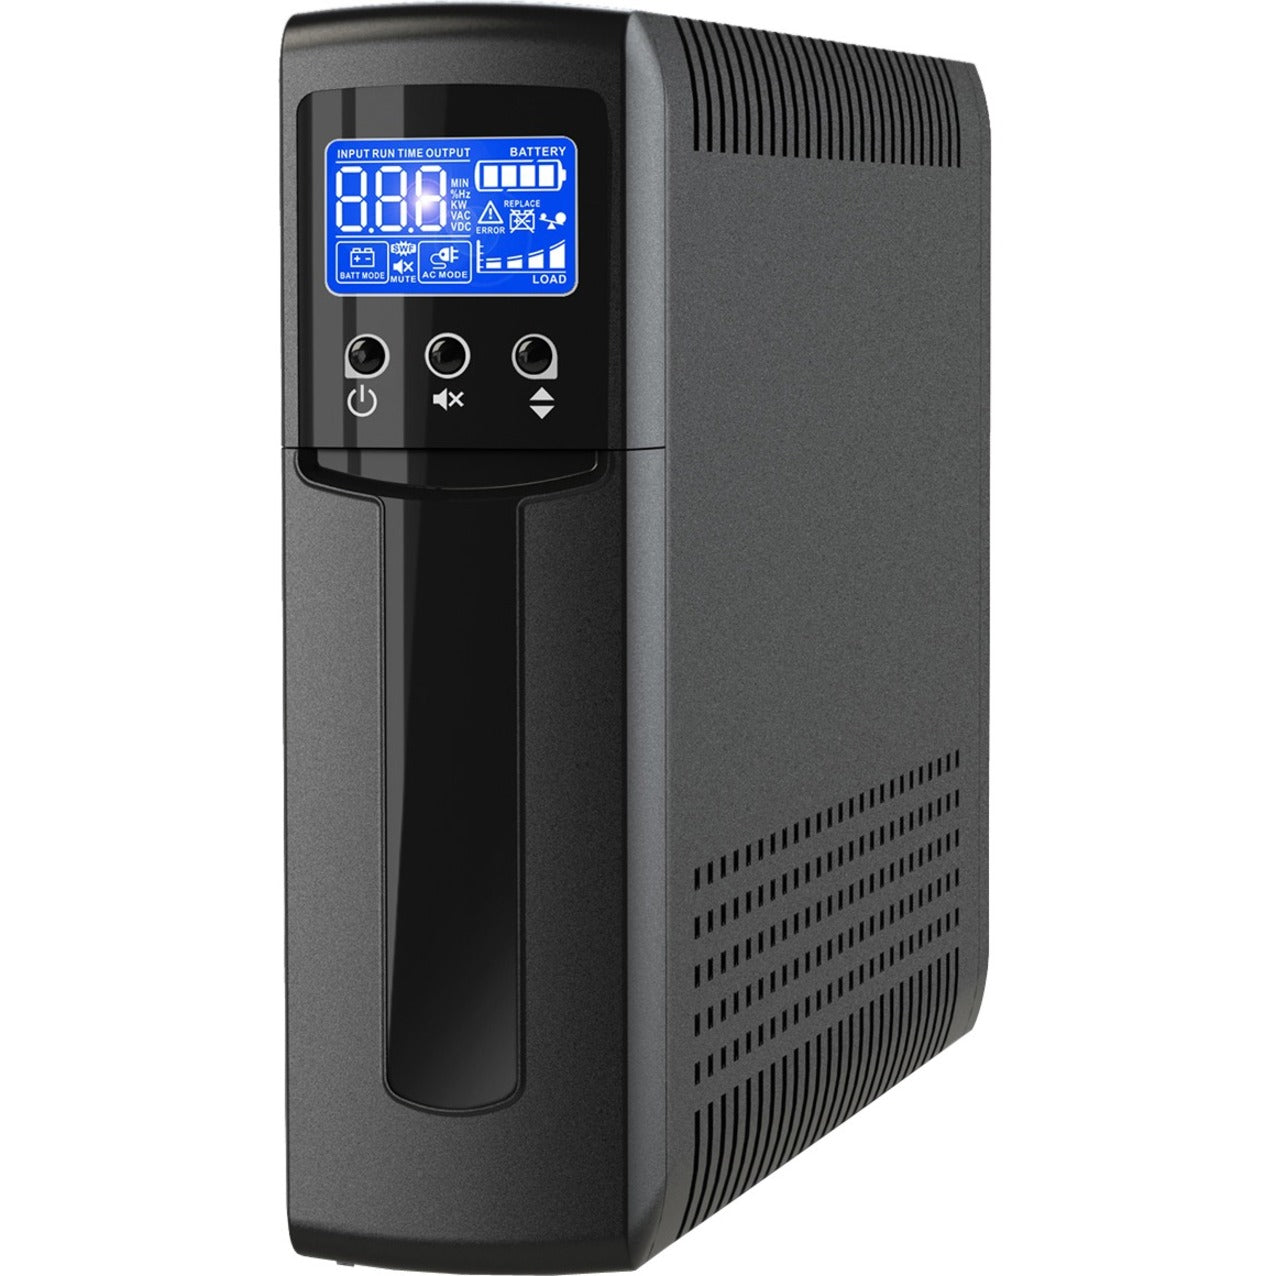 V7 UPS1TW1500-1N UPS 1500VA Tower, 3 Year Limited Warranty, Energy Star, FCC, TÜV Certified, REACH and RoHS Compliant